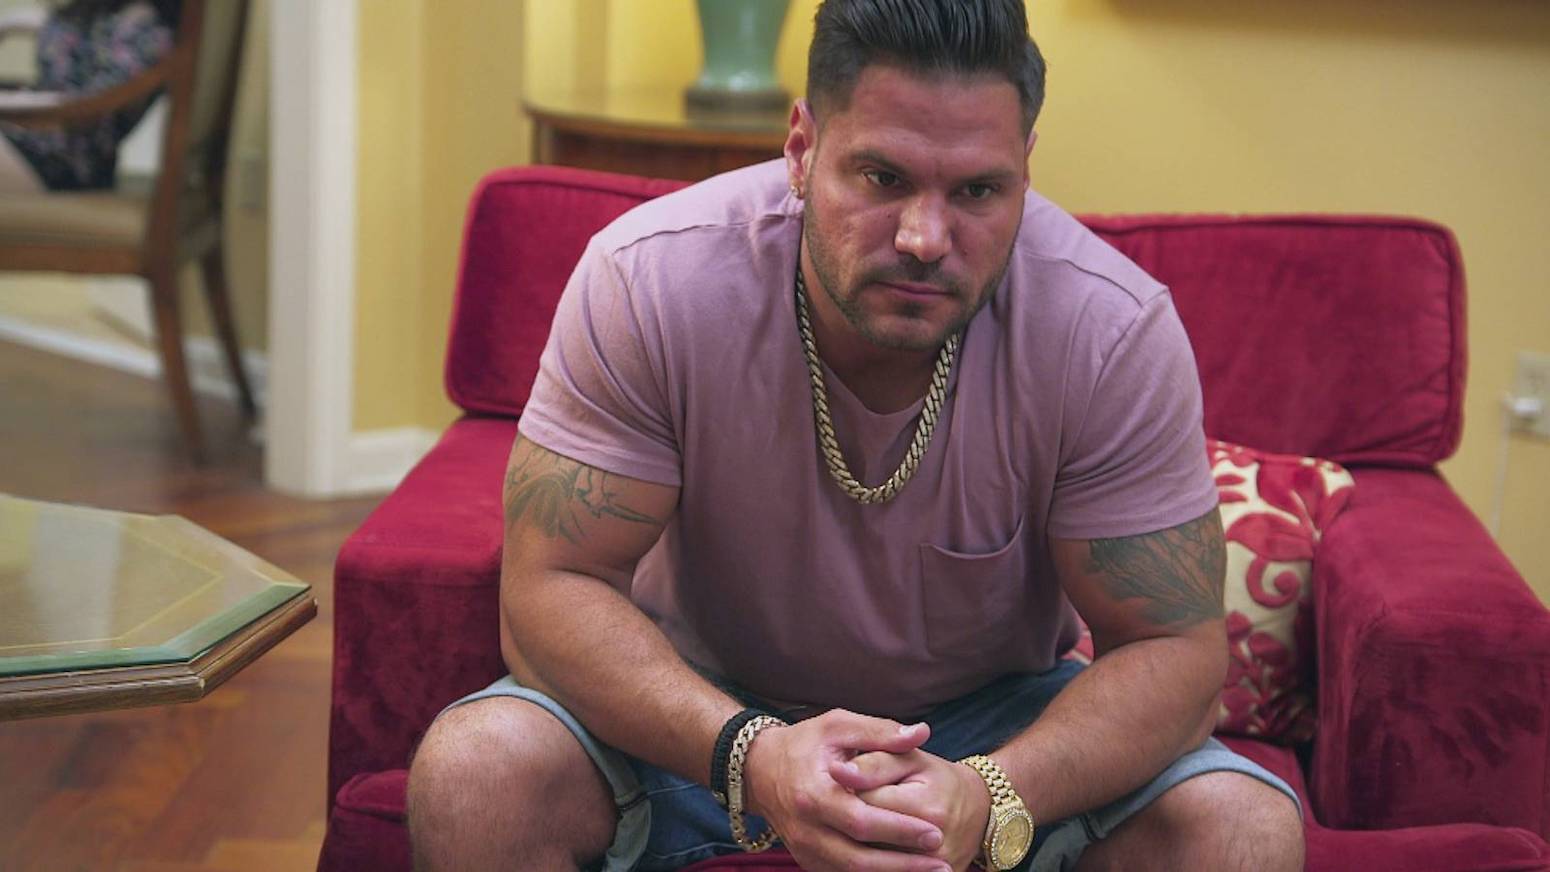 Ronnie Ortiz-Magro in 'Jersey Shore: Family Vacation' Season 4